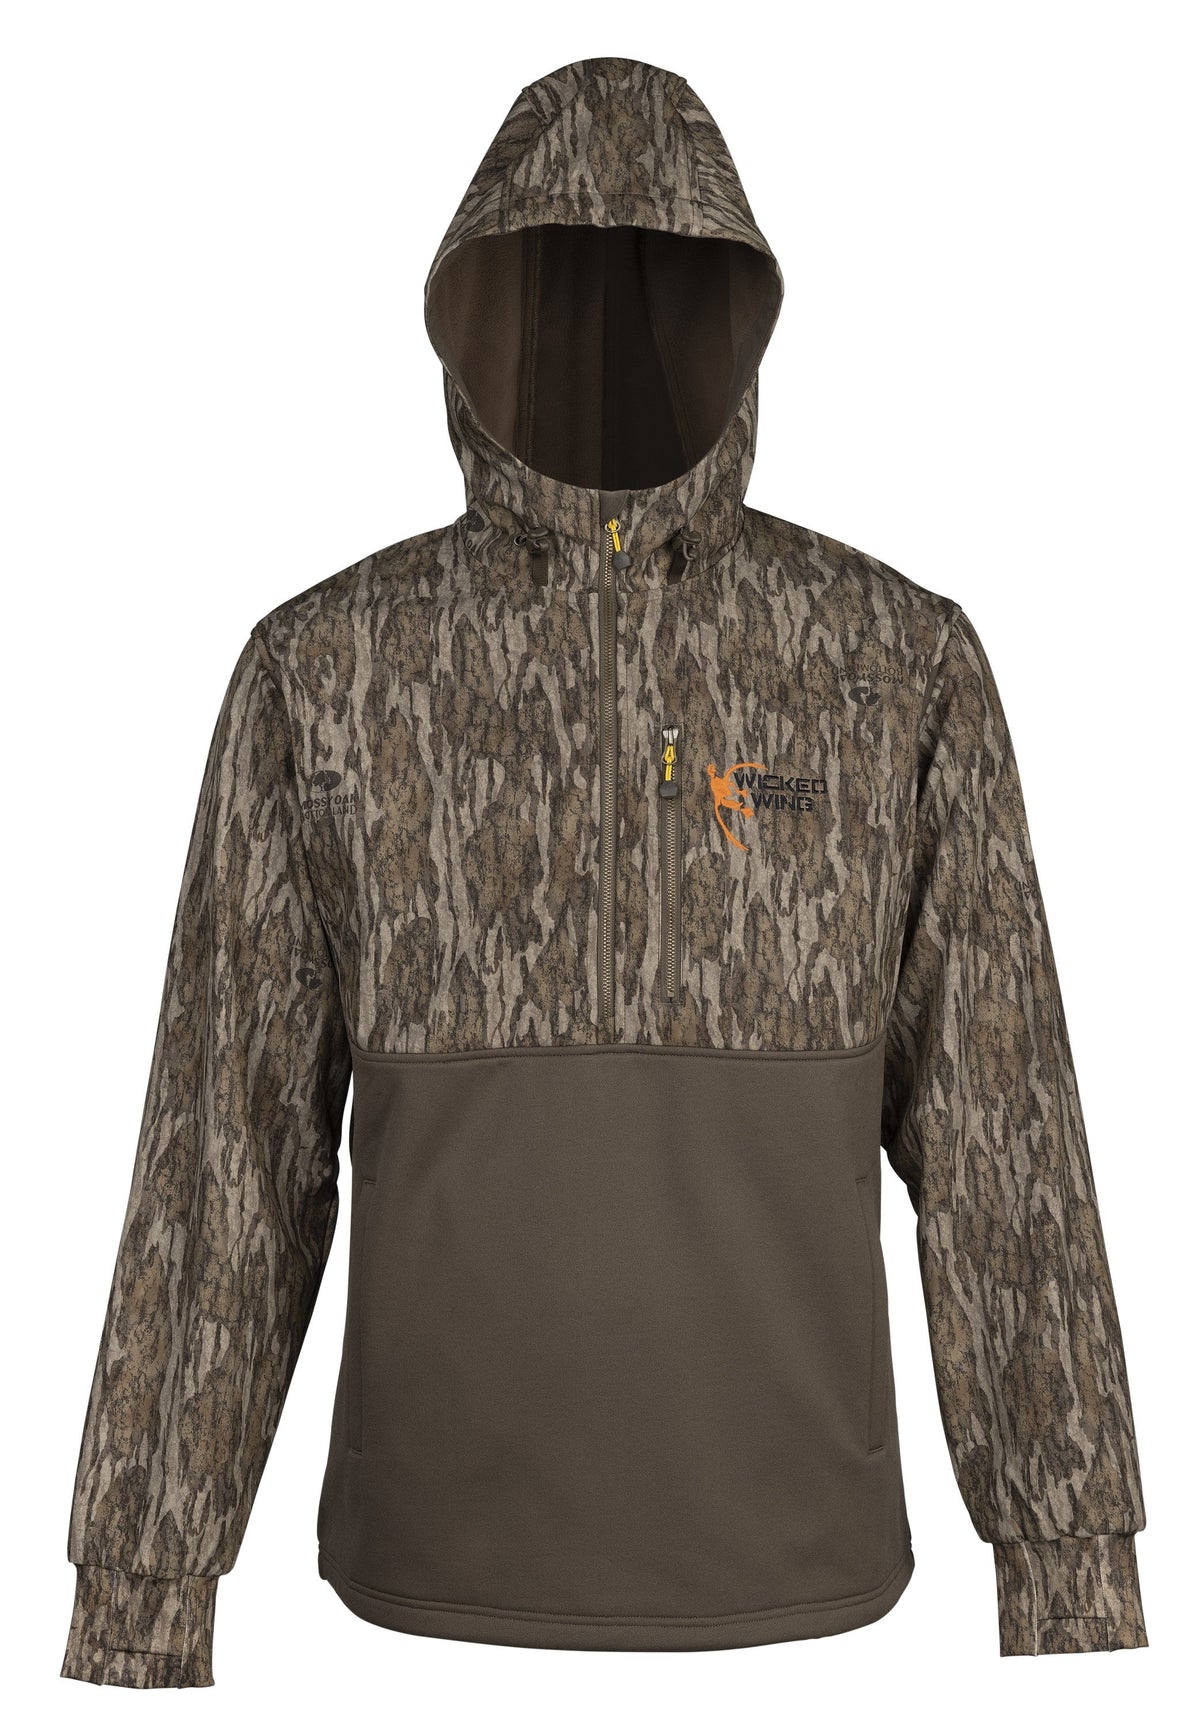 SHT,WW,SMOOTHBORE HOODED,MOBL,2XL